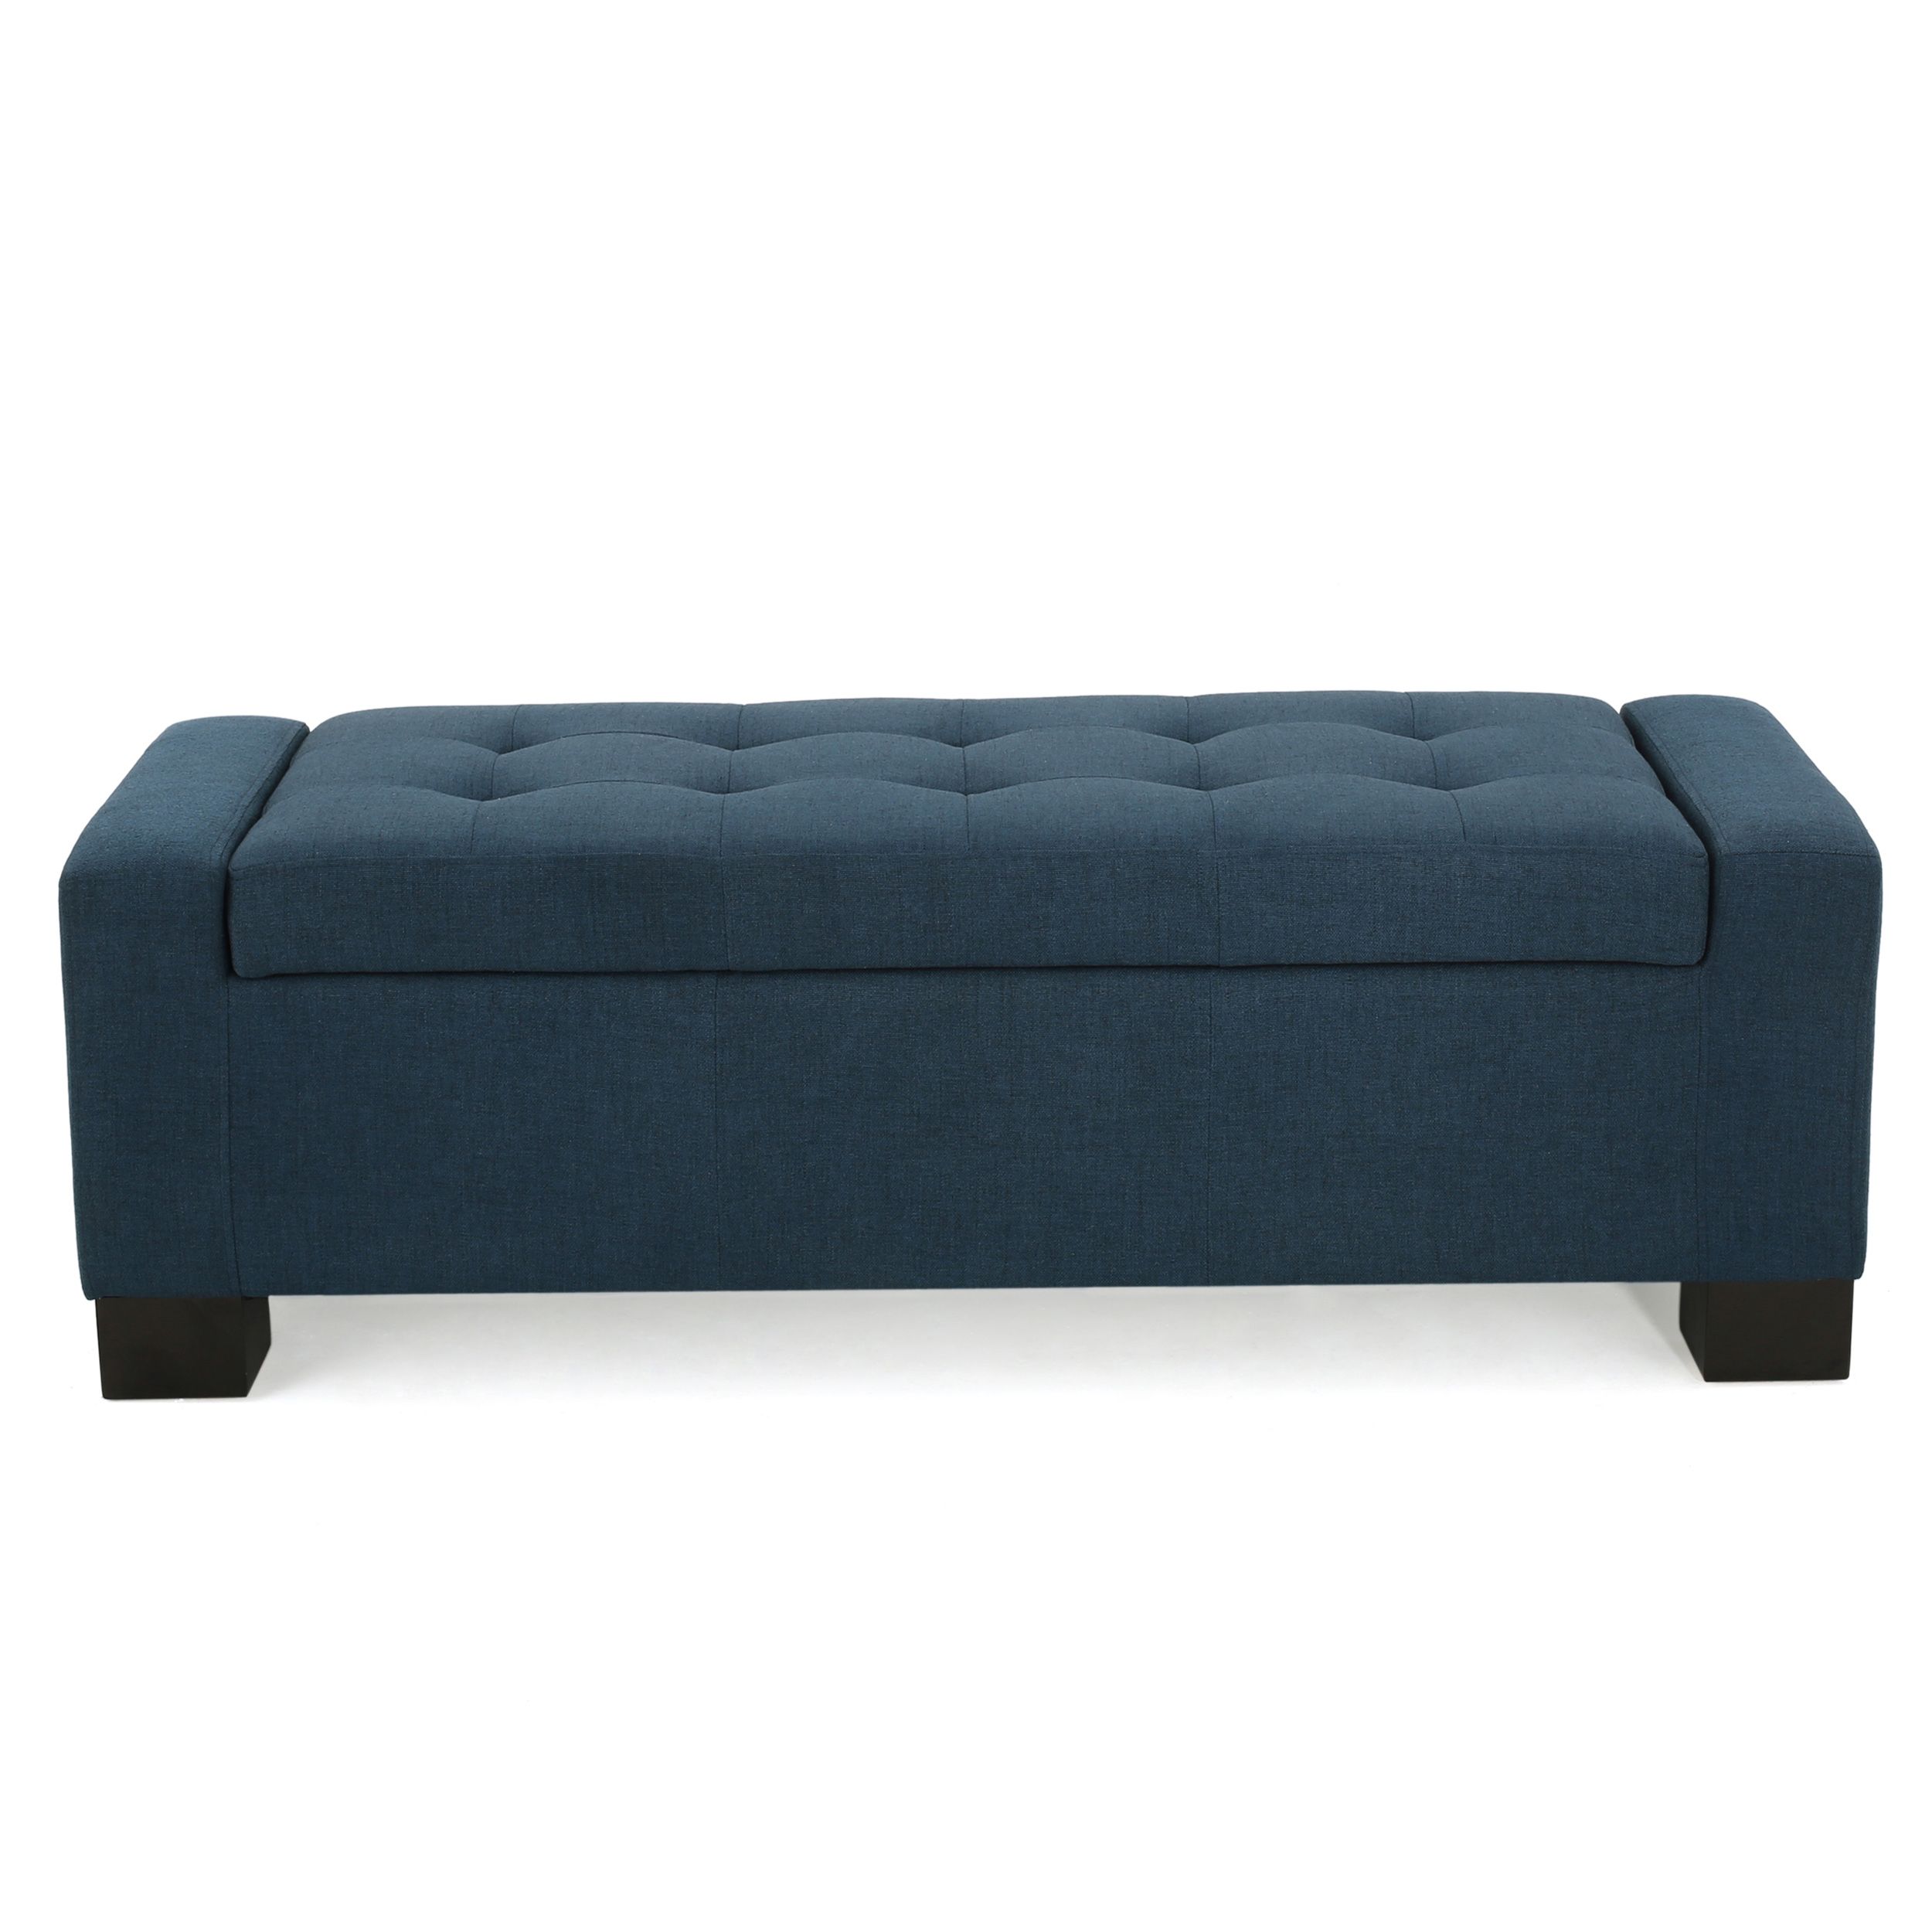 Lawson Contemporary Tufted Fabric Storage Ottoman Bench, Dark Blue With Fabric Tufted Storage Ottomans (View 4 of 20)